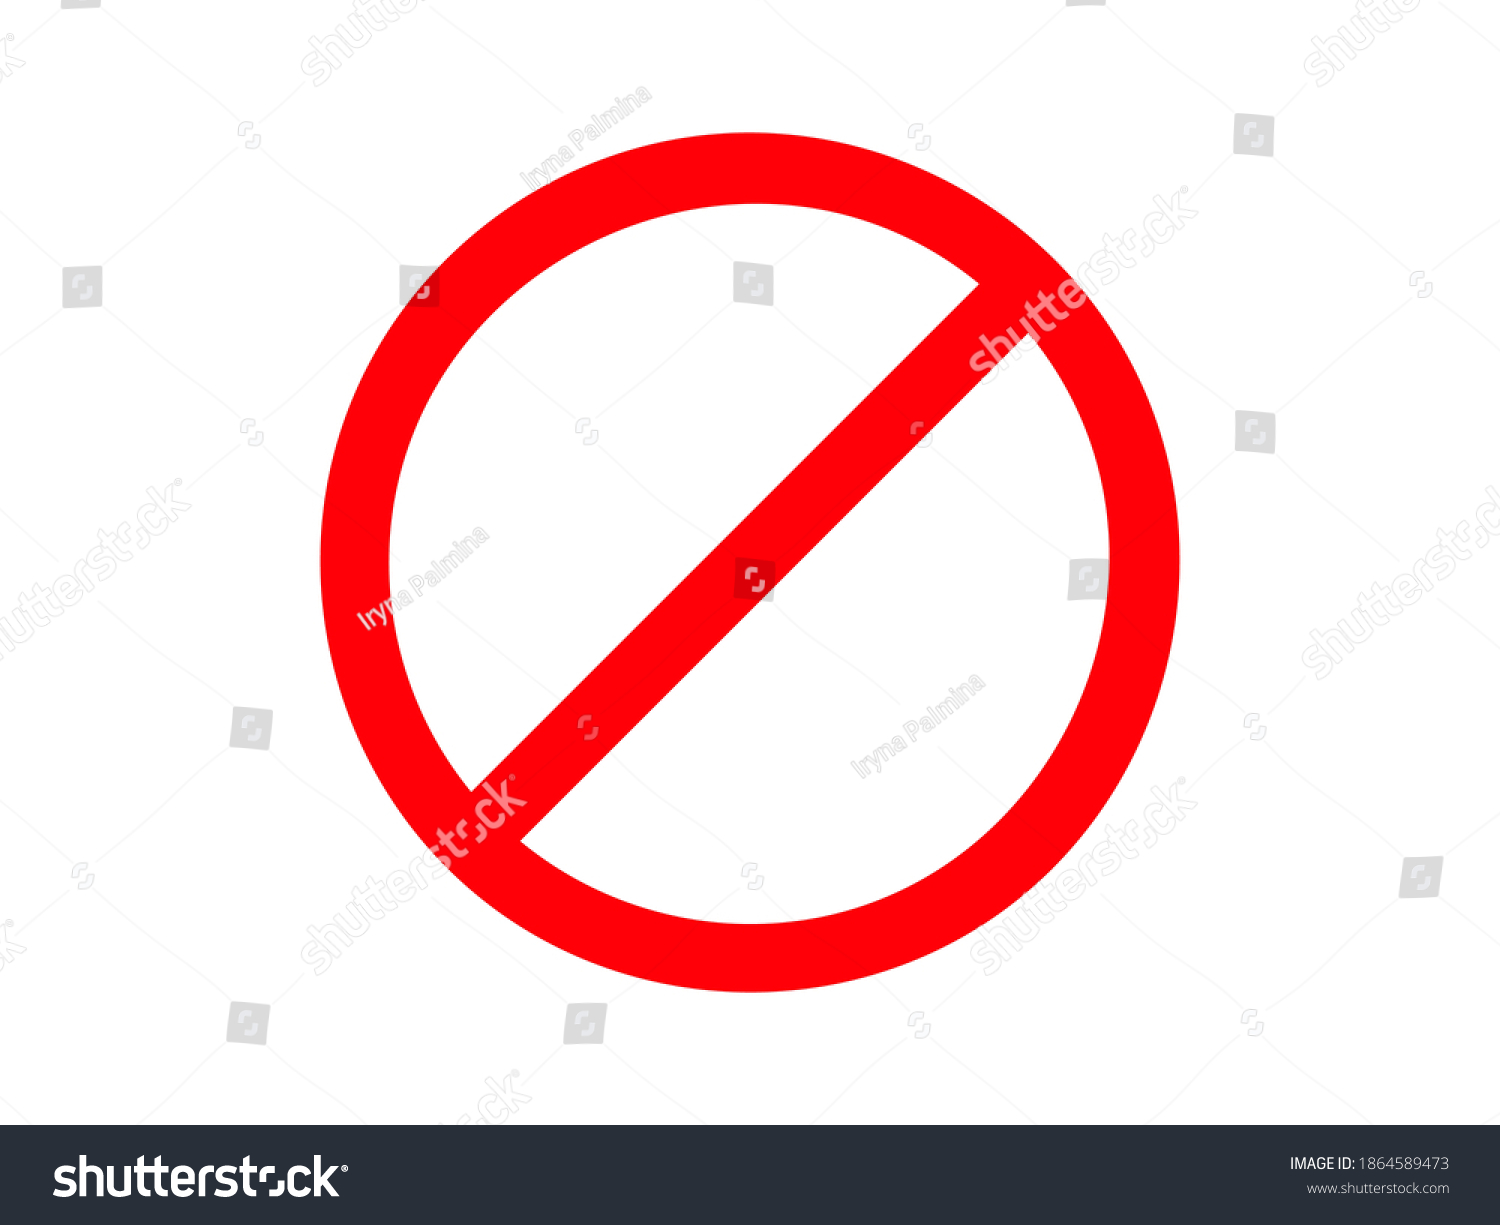 SVG of Red prohibition sign. Circle with crossed out line ban symbol and warning about danger restriction of movement and information taboo entry into premises and protection from vector troubles. svg